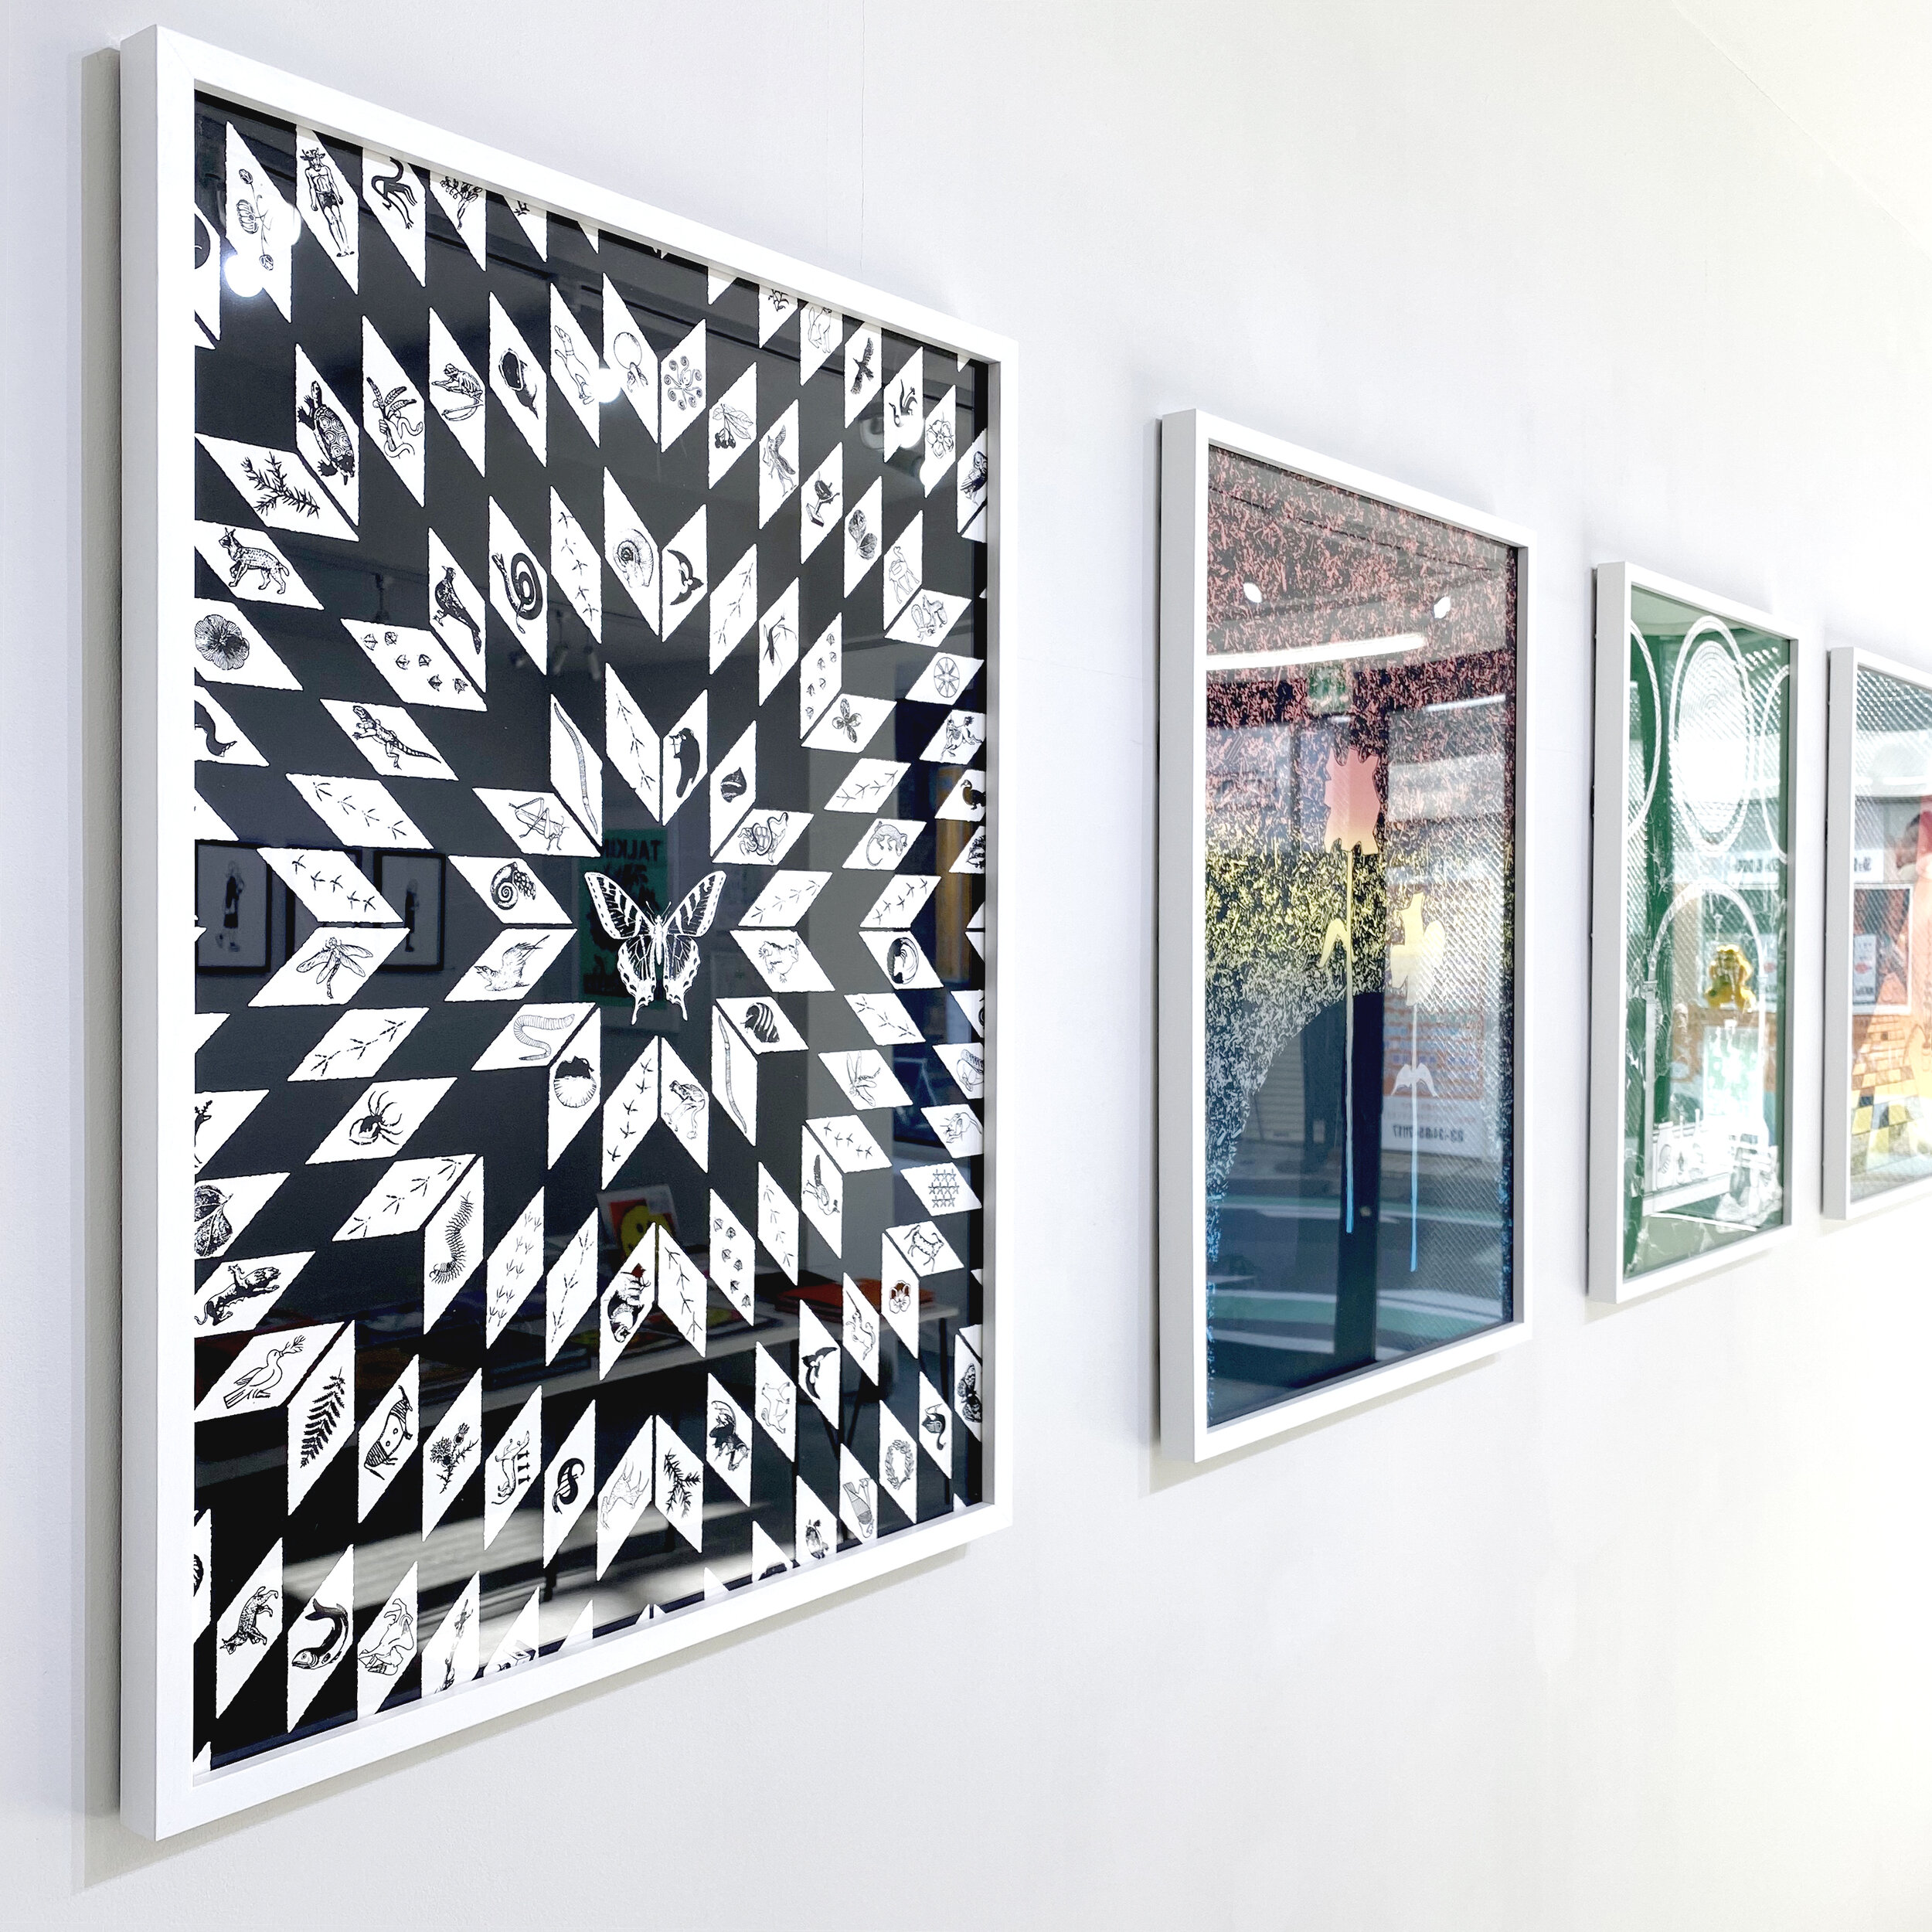  Selection of screenprints  Commune gallery and shop  Tokyo, Japan  2020 